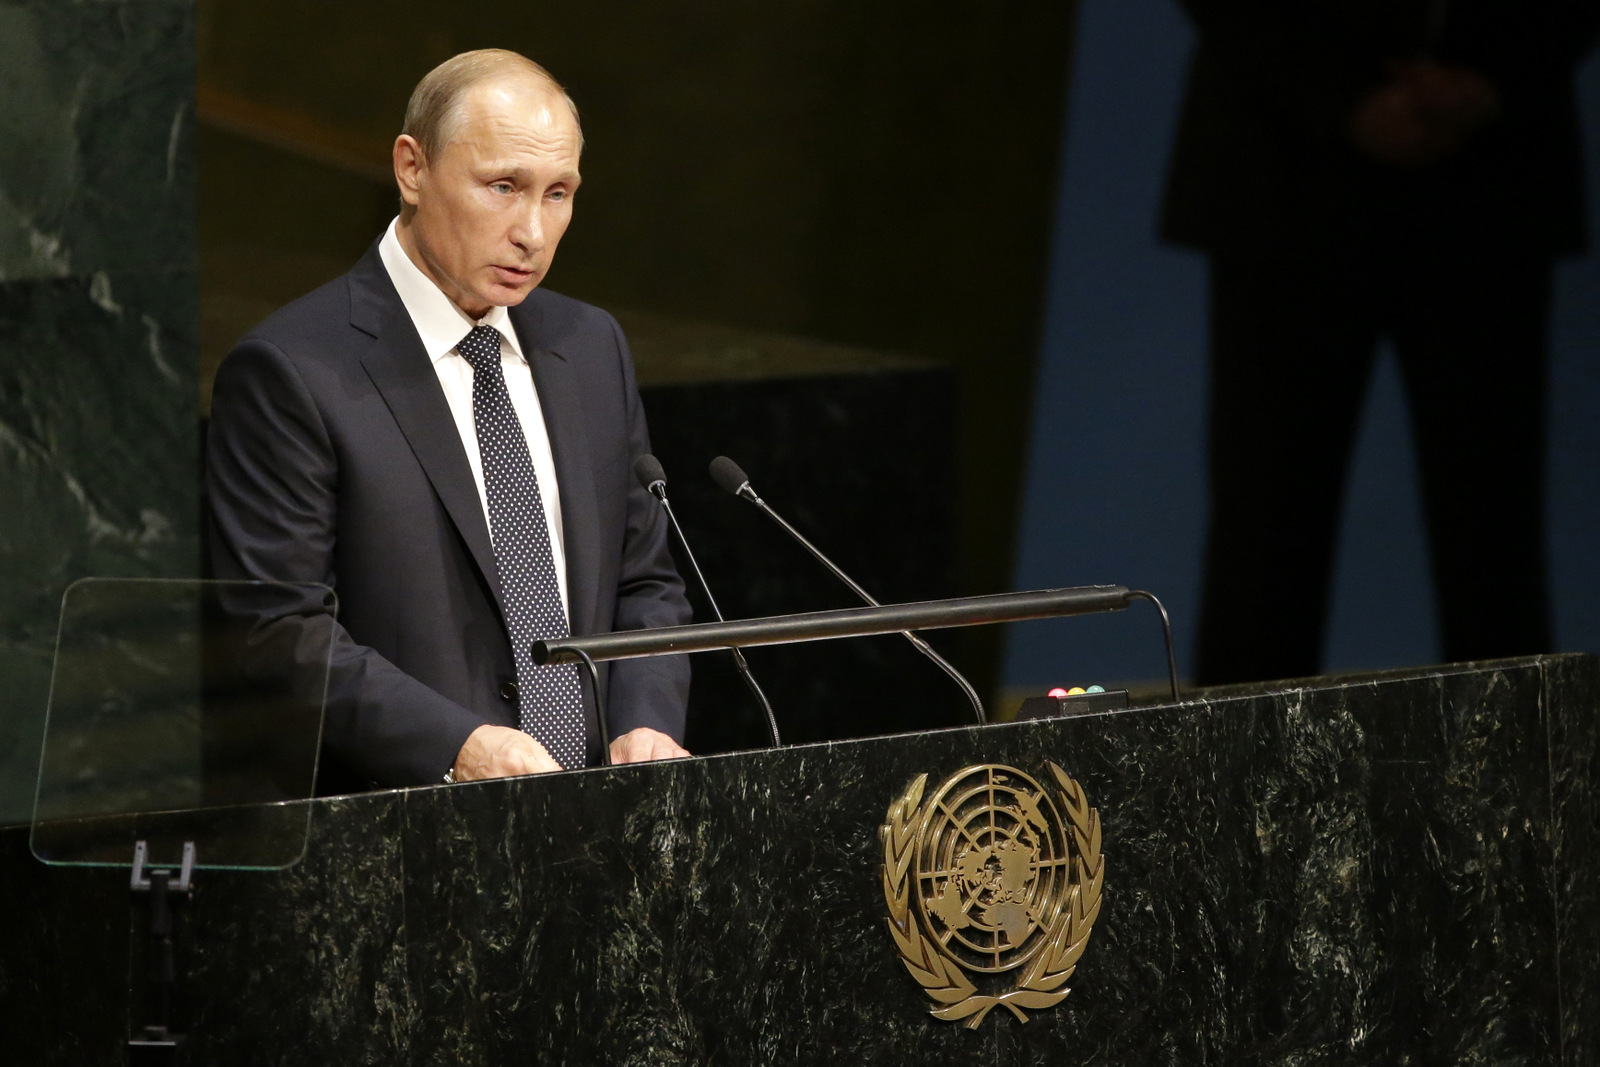 Russian President President Vladimir Putin addresses the 70th session of the United Nations General Assembly at U.N. headquarters, Monday, Sept. 28, 2015. (AP Photo/Mary Altaffer)